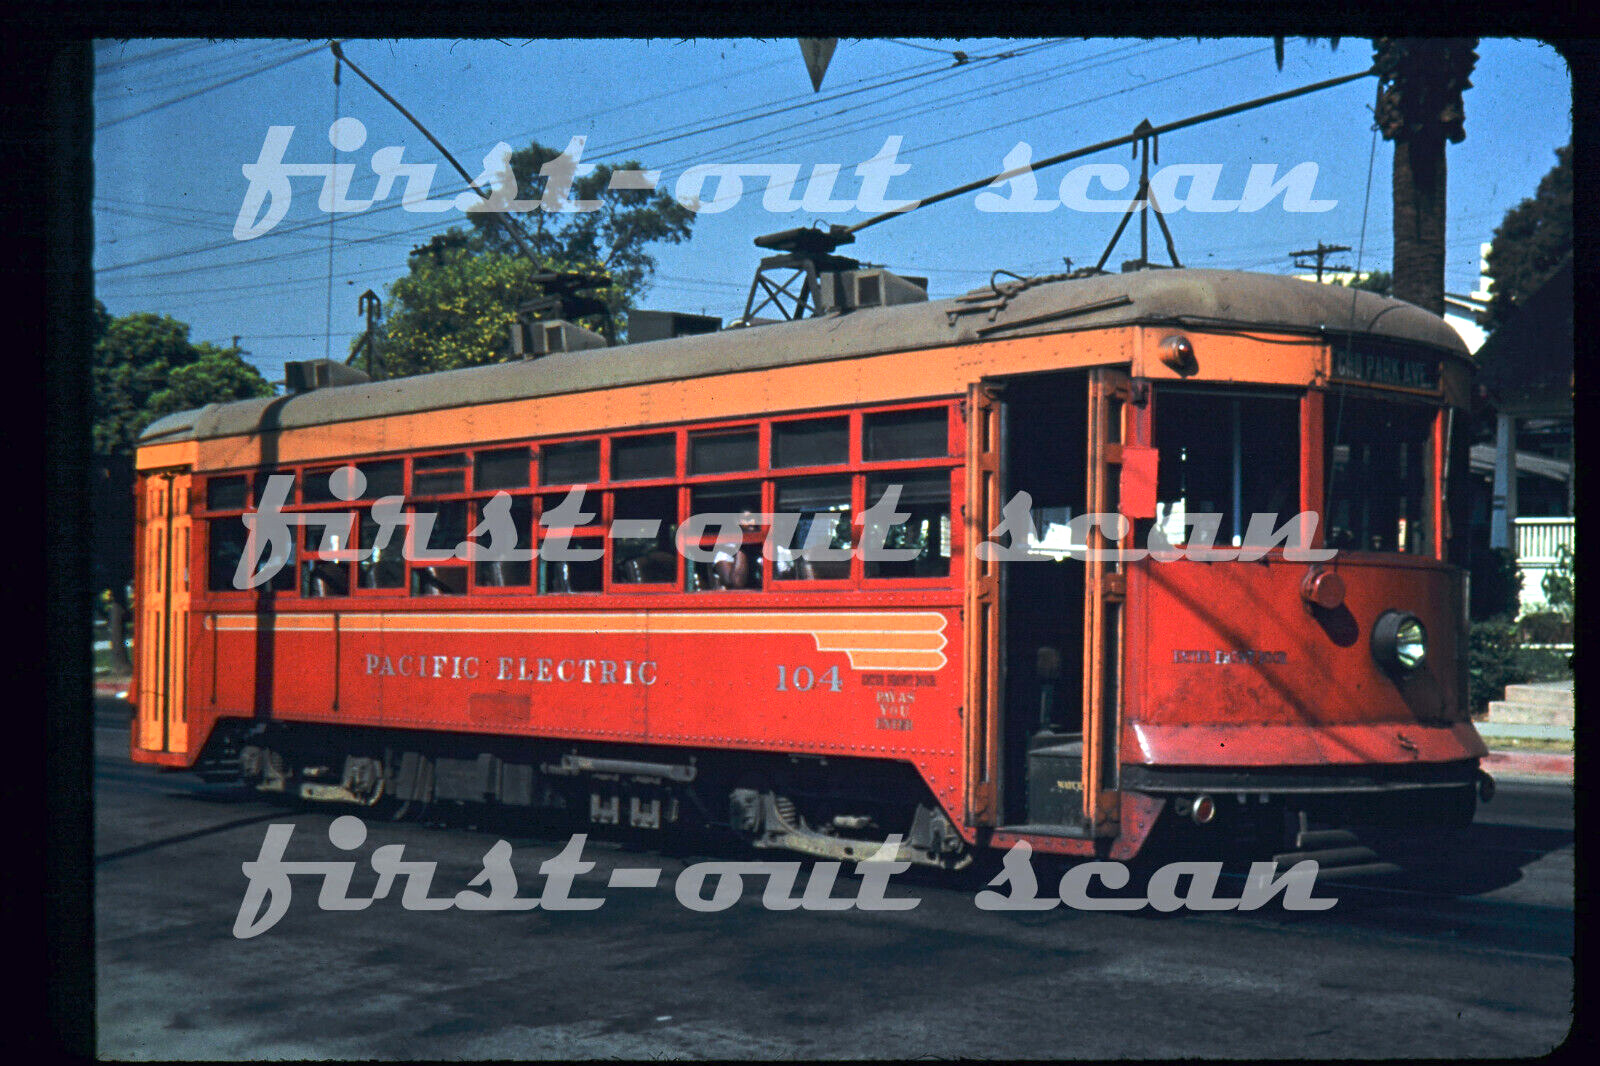 R DUPLICATE SLIDE - Pacific Electric PE 104 Trolley Electric